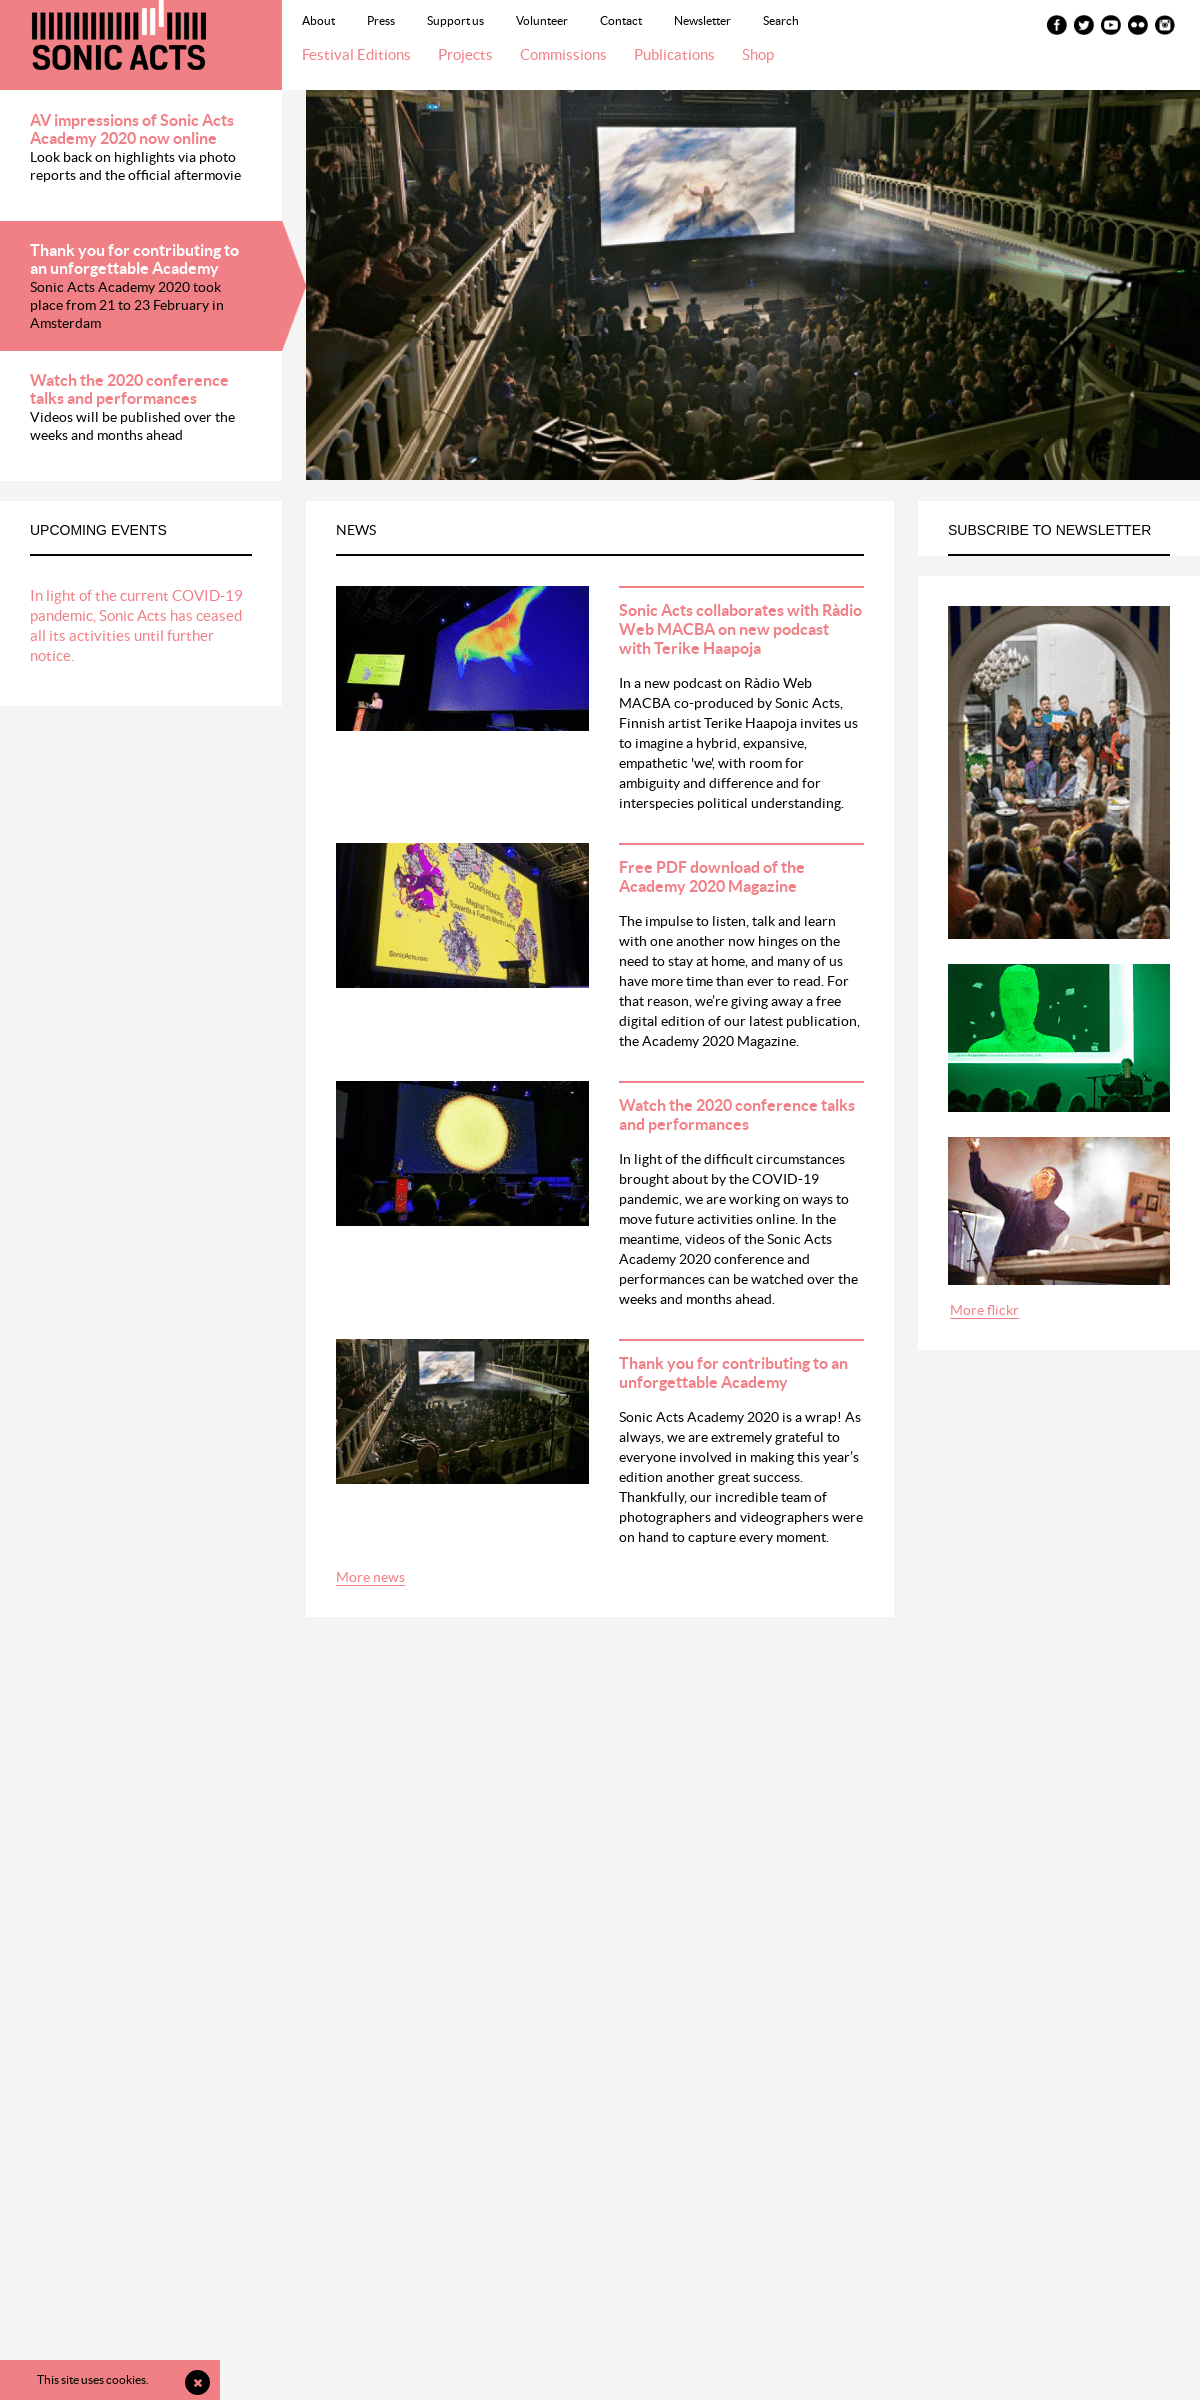 A complete backup of sonicacts.com